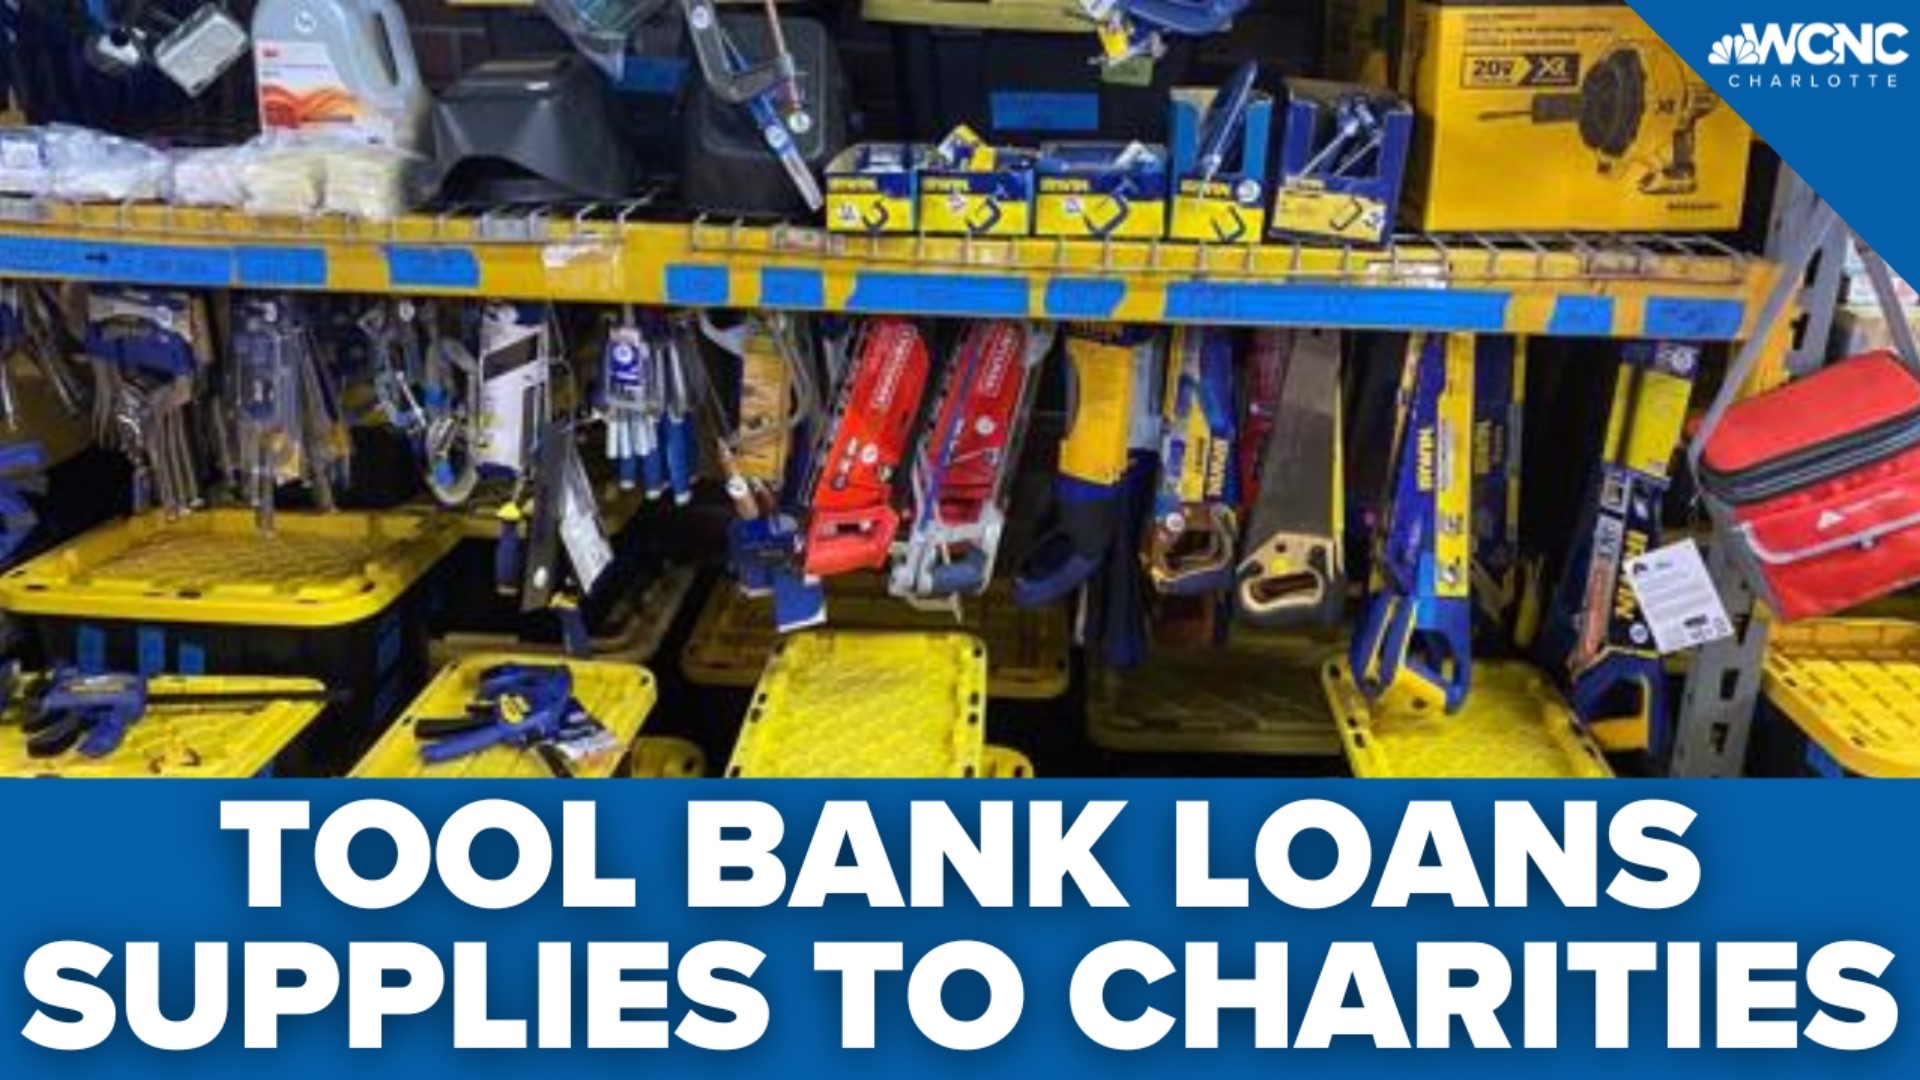 The Charlotte Community Tool Bank is a nonprofit organization that loans tools and equipment to Charlotte-area charities.